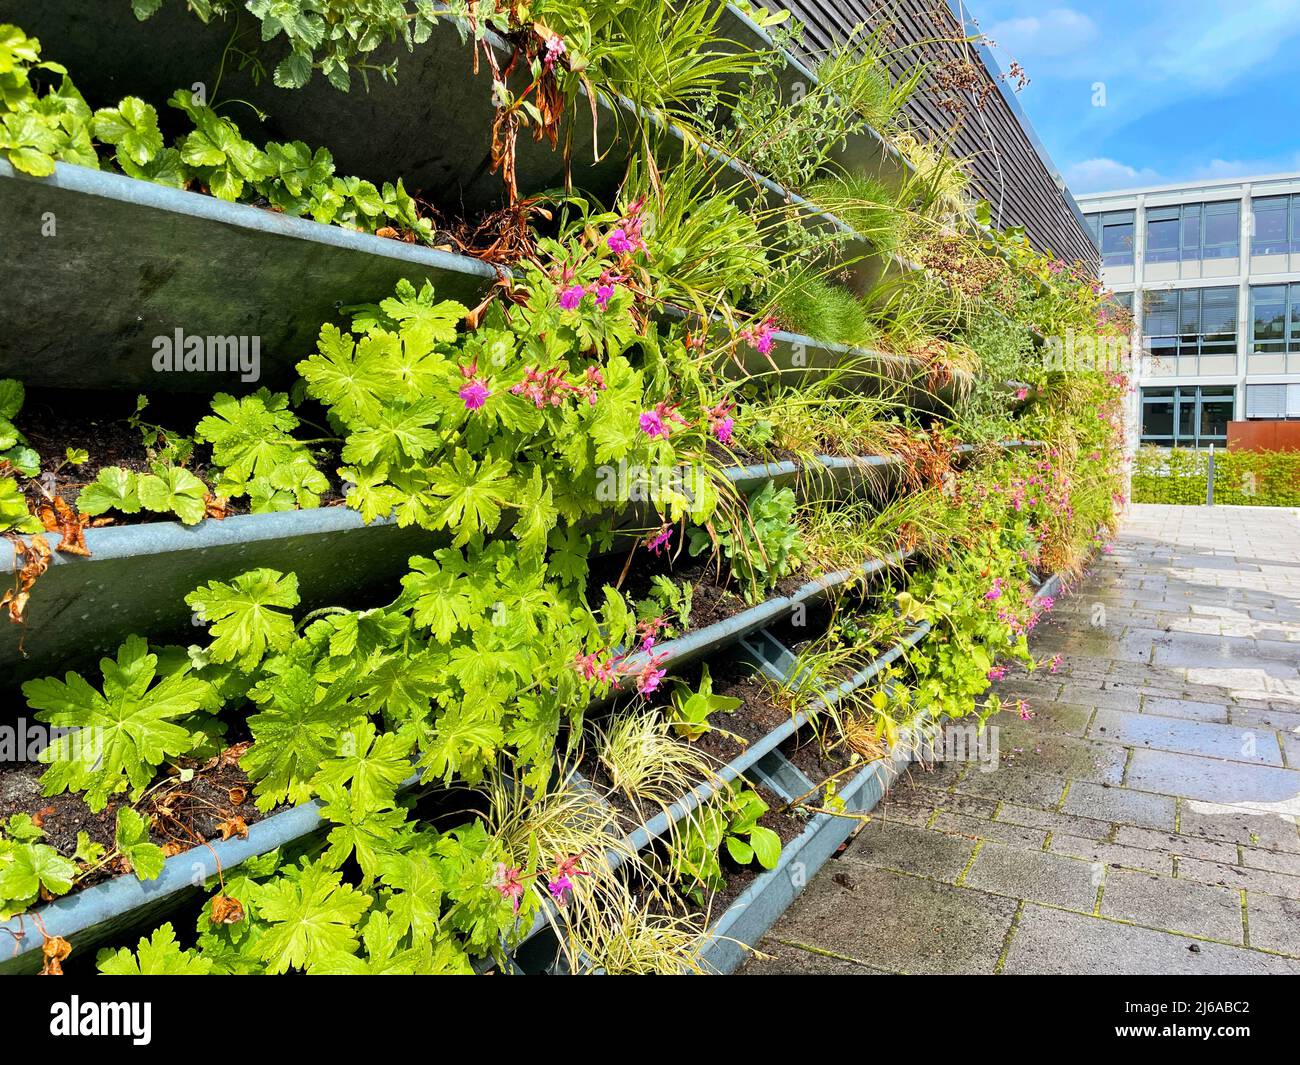 Living wall garden in city center of Oldenburg. Vertical green wall garden for climate adaptation and urban greening Stock Photo